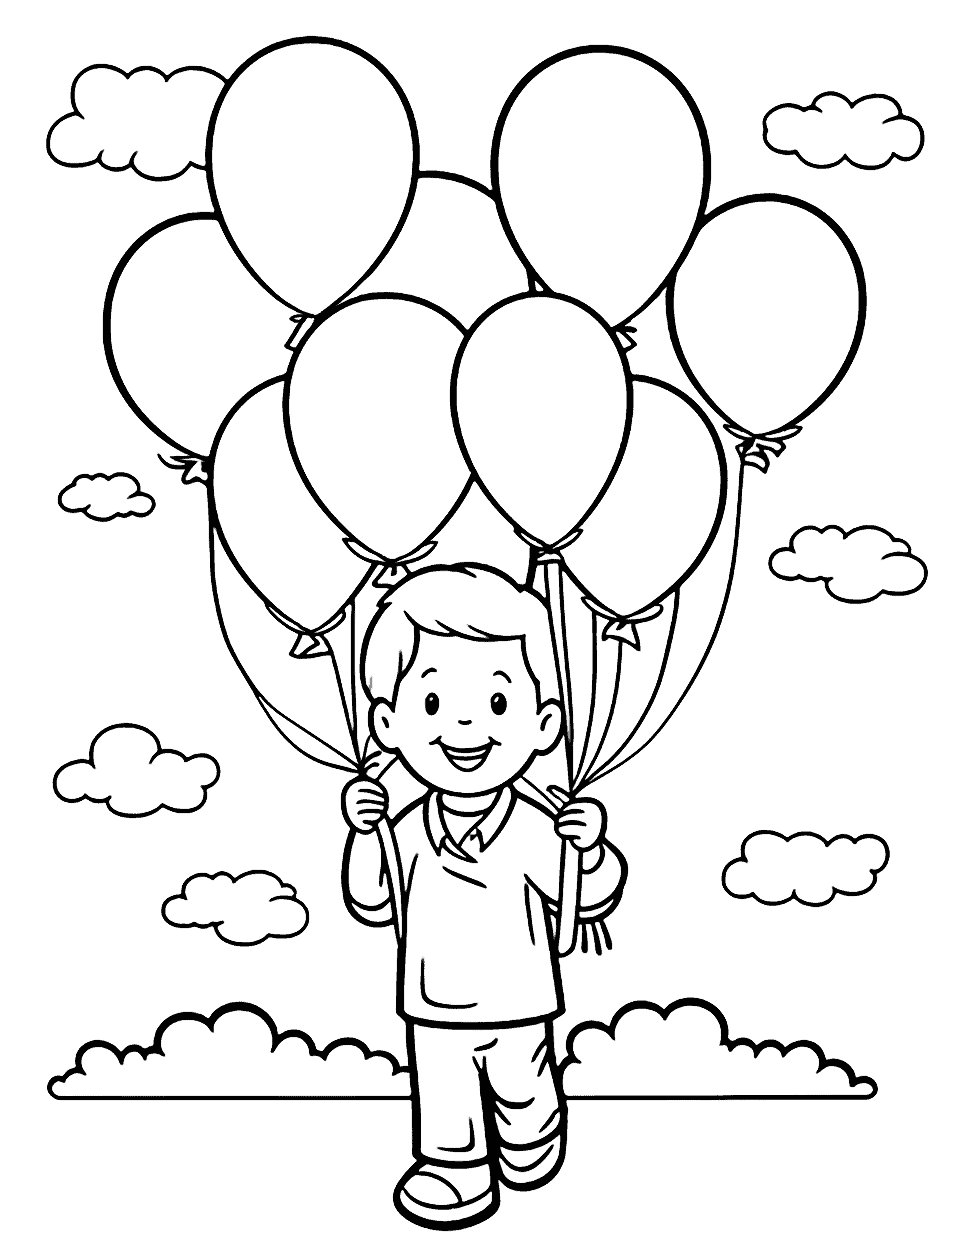 Boy's Birthday Balloon Bash Happy Coloring Page - A boy happily holding a bunch of colorful balloons.